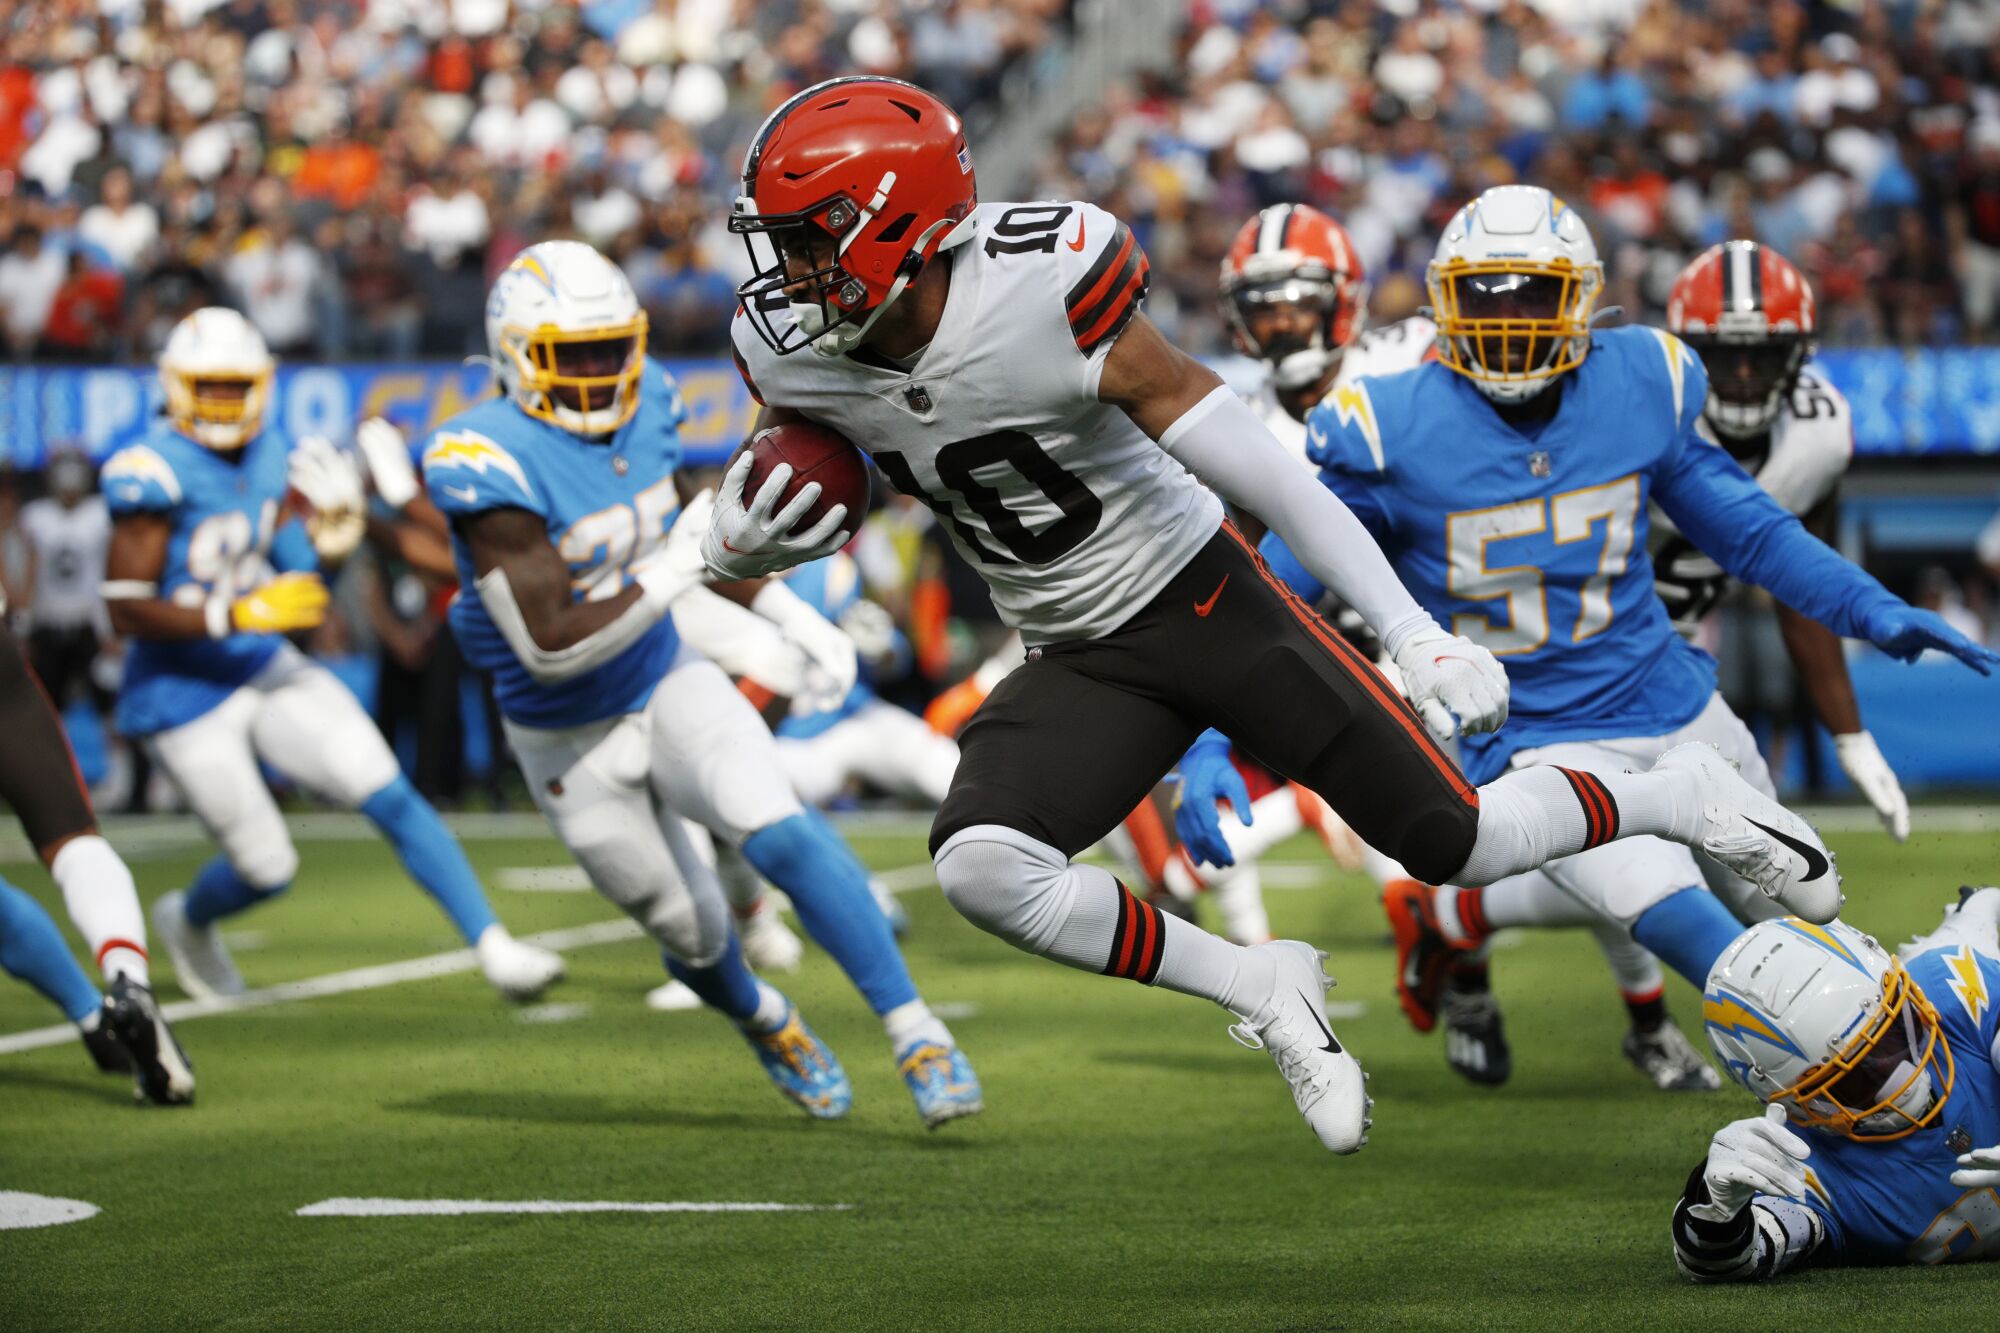 Cleveland Browns wide receiver Anthony Schwartz finds a hole in the Chargers' defense during the second half.